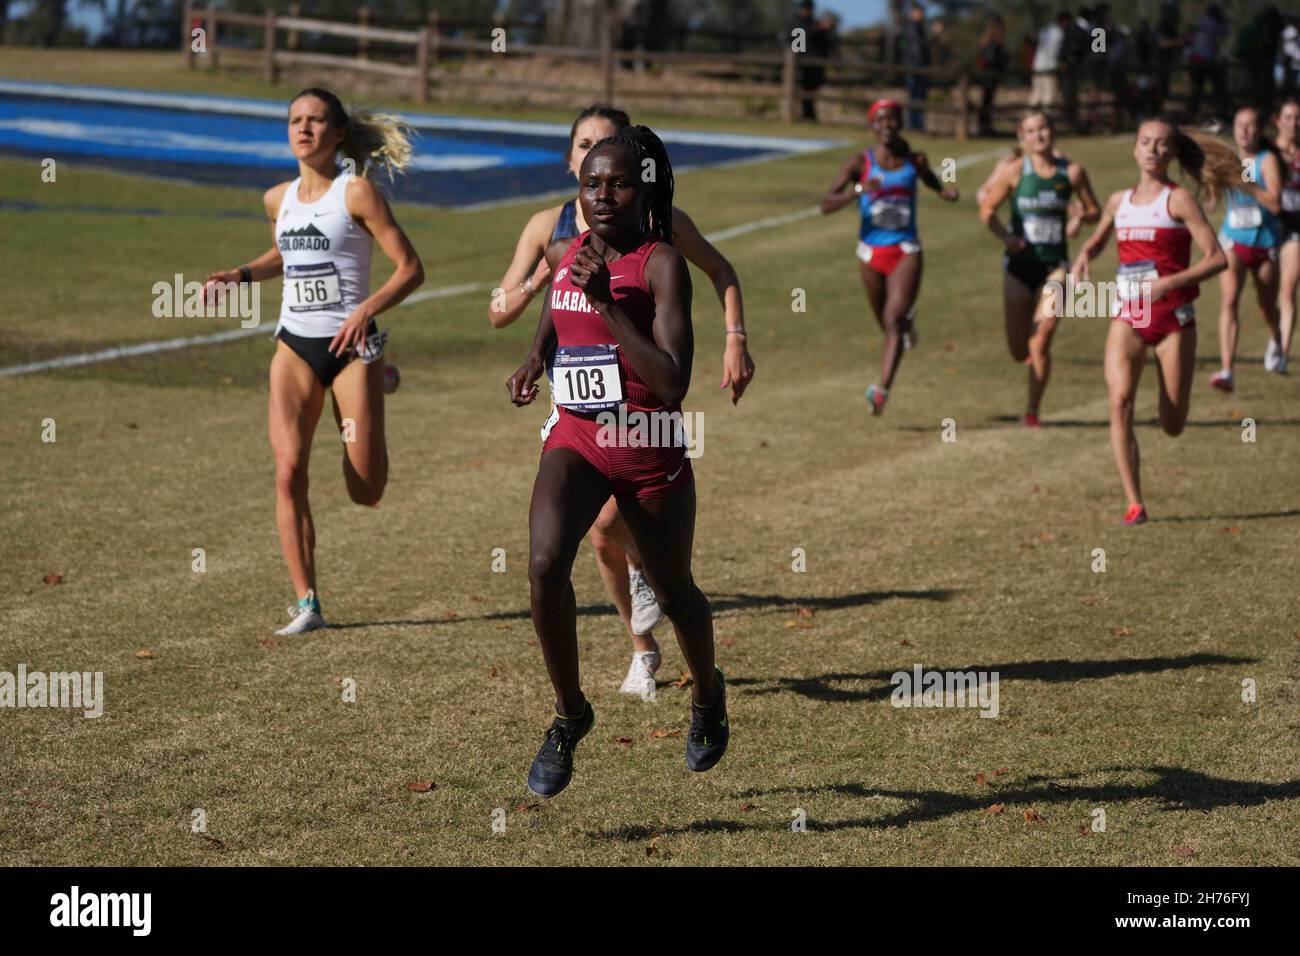 Flomena Asekol of Alabama places 29th in 19:51.0 in the women's race during the NCAA cross country championships at Apalachee Regional Park, Saturday, Stock Photo